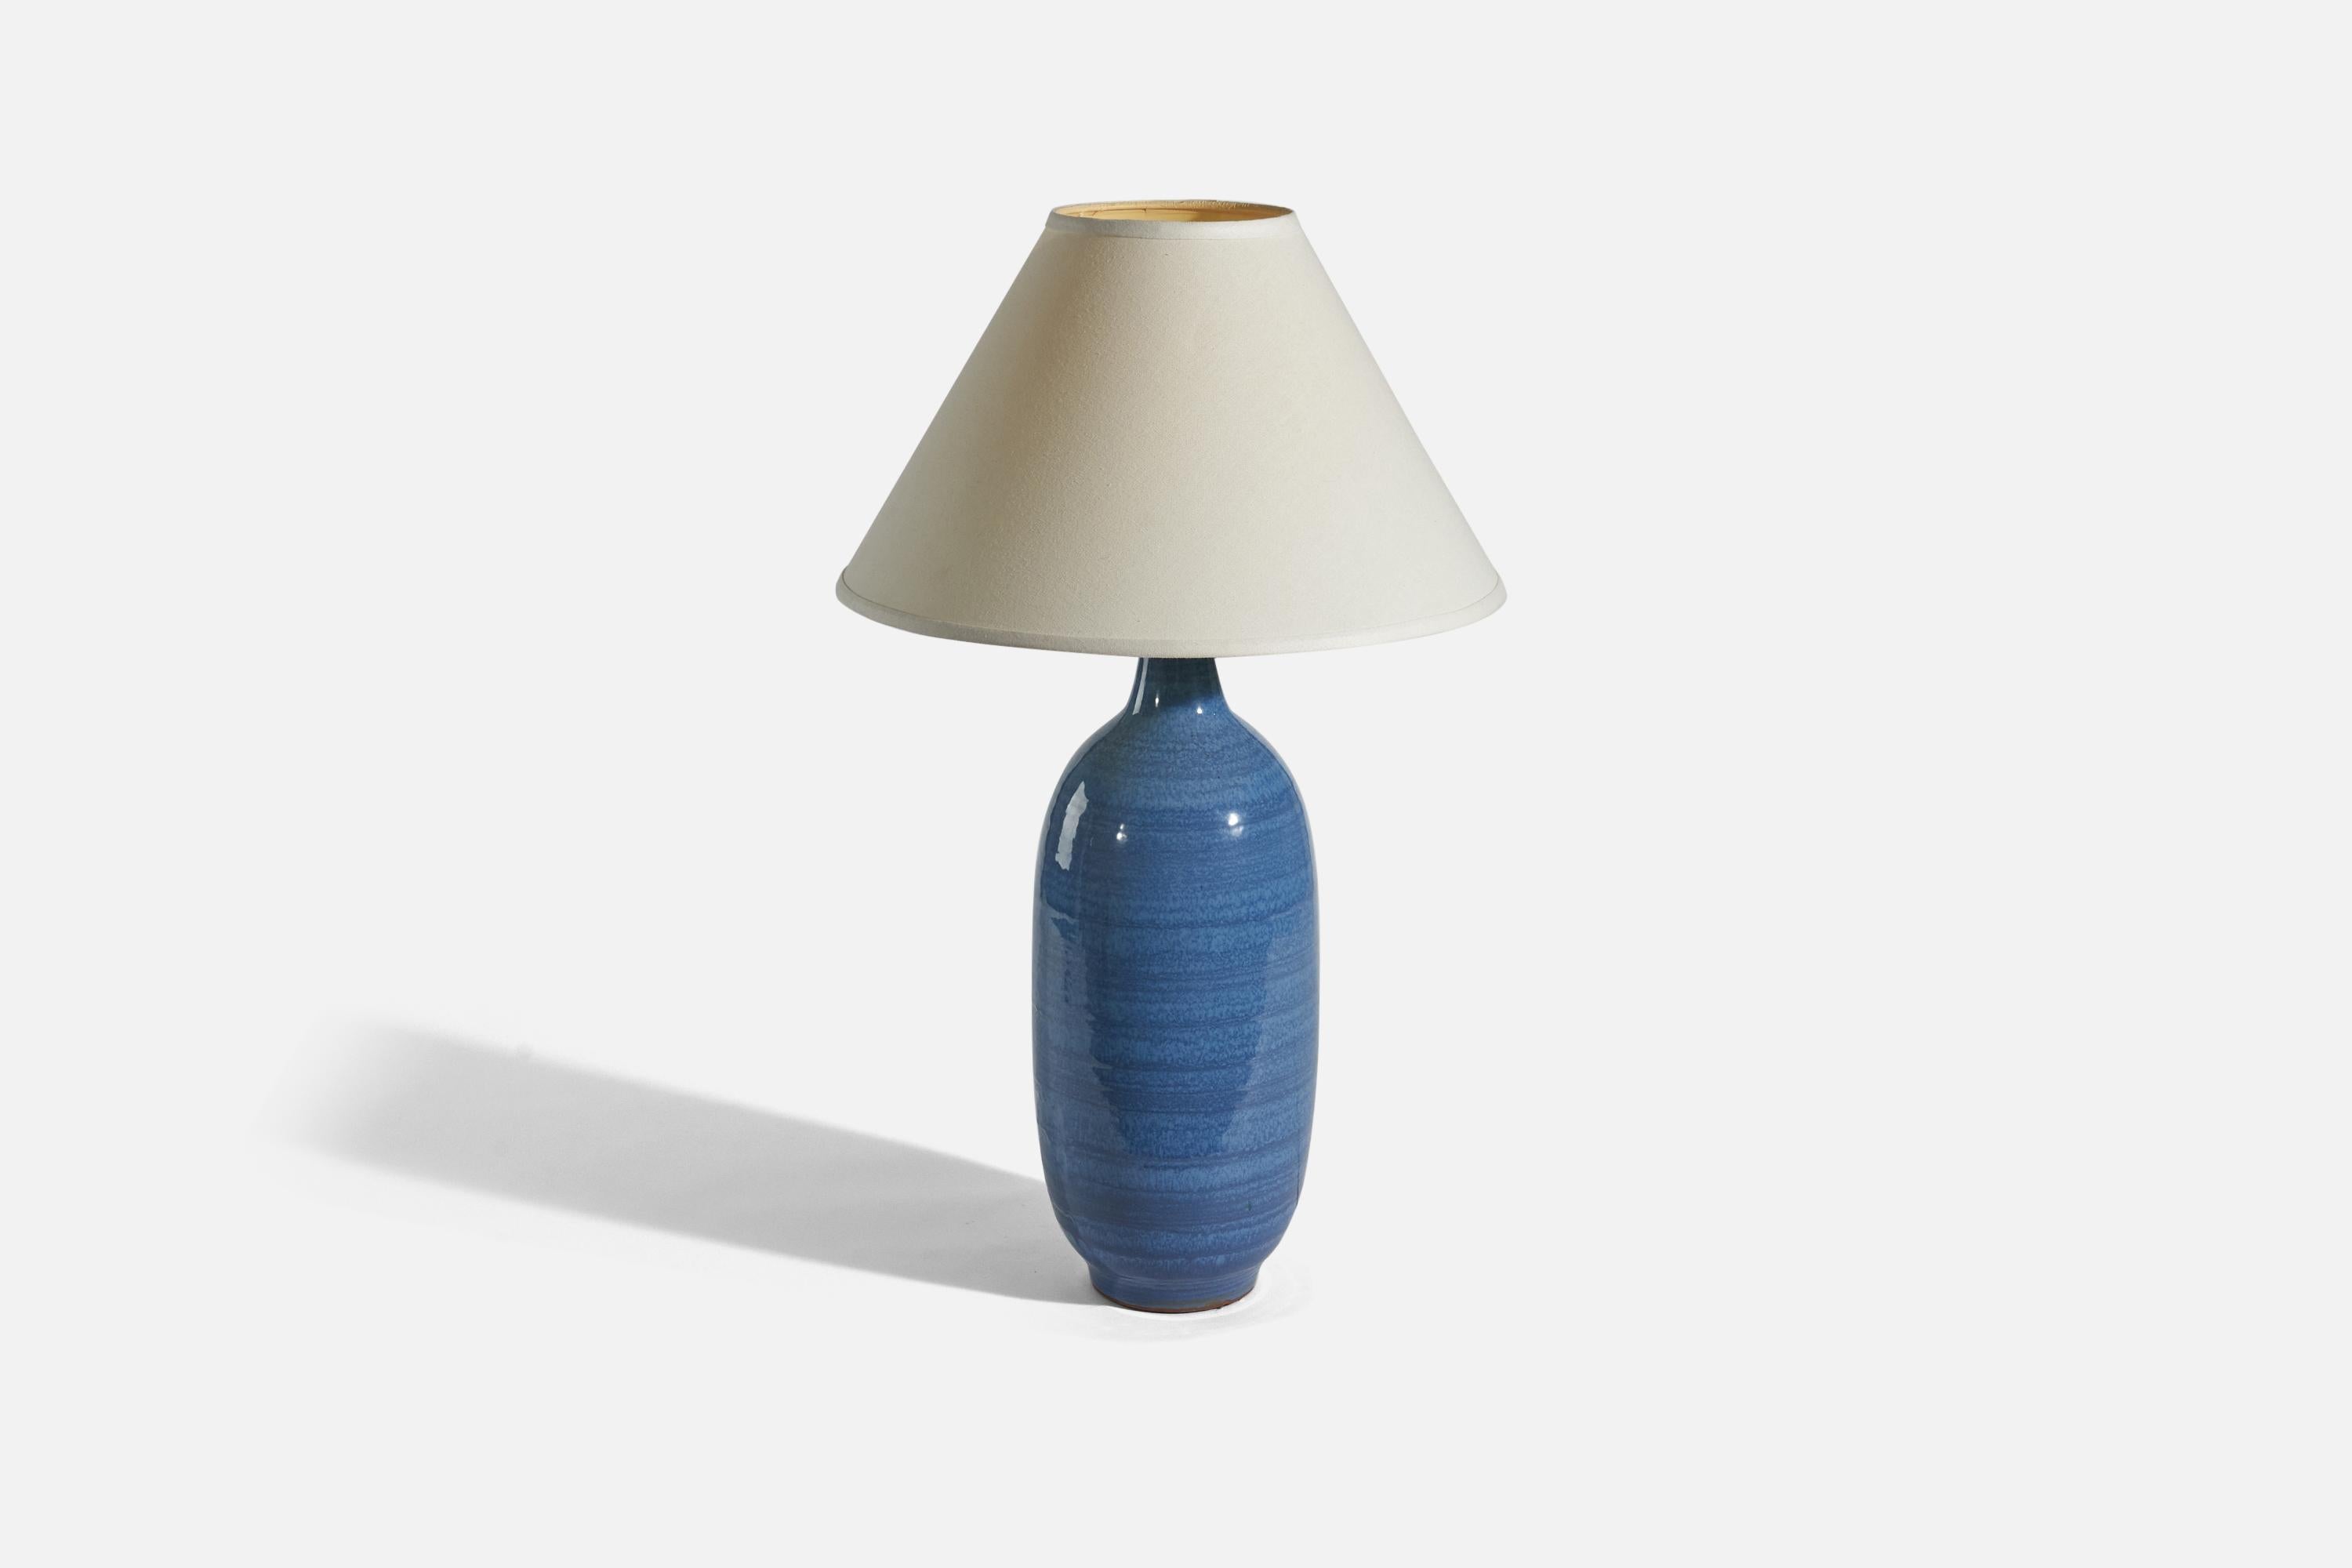 A pair of blue, glazed ceramic table lamps designed by Lee Rosen and produced by Design Technics, United States, 1950s. 

Sold without lampshade. 
Dimensions of lamp (inches) : 22.93 x 7.81 x 7.81 (Height x Width x Depth)
Dimensions of shade